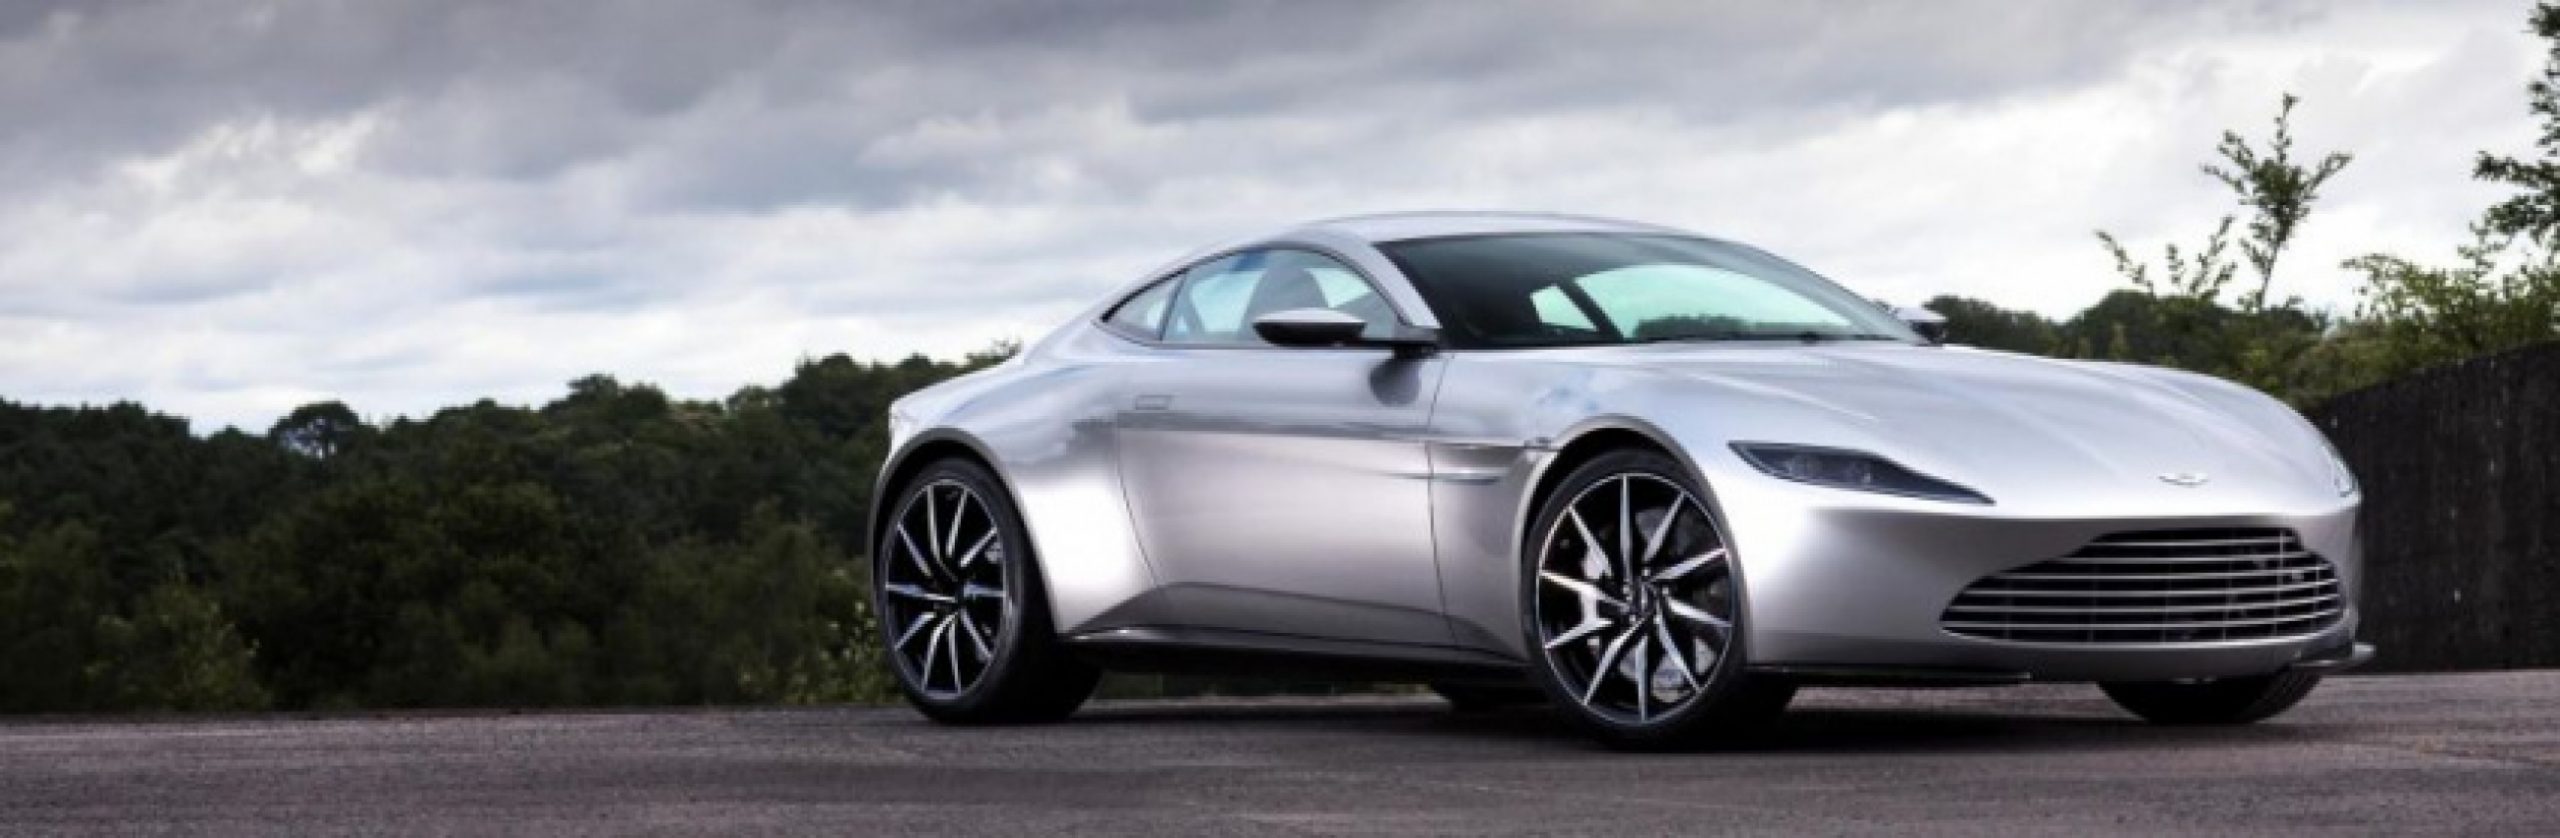 aston martin, autos, cars, db10, aston martin db10 to be auctioned off